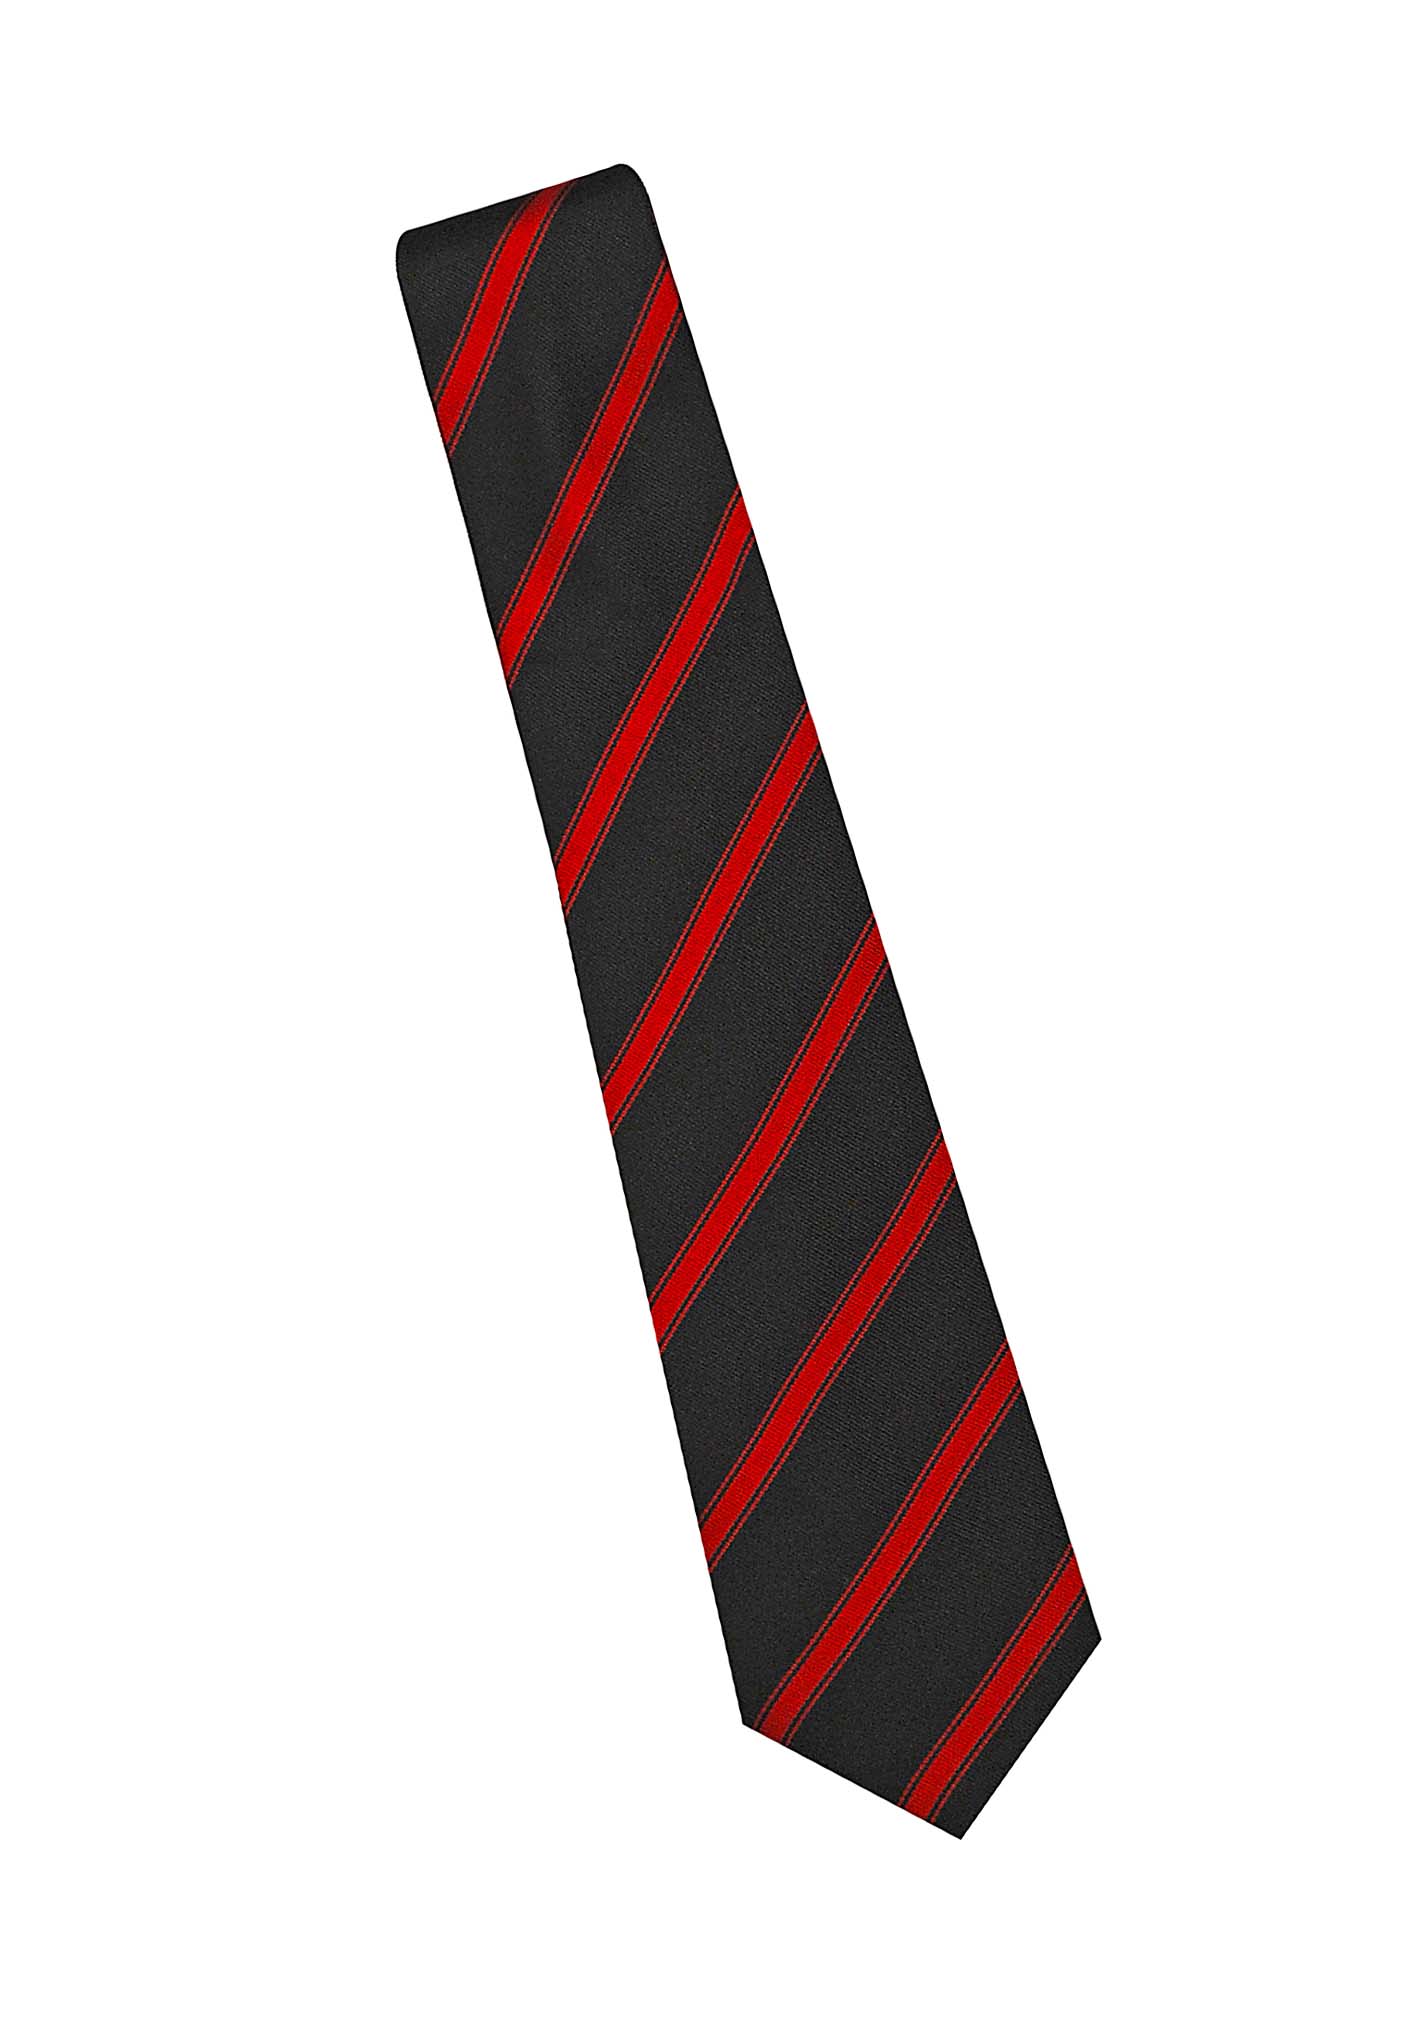 St Paul's Cathedral School Boys Tie